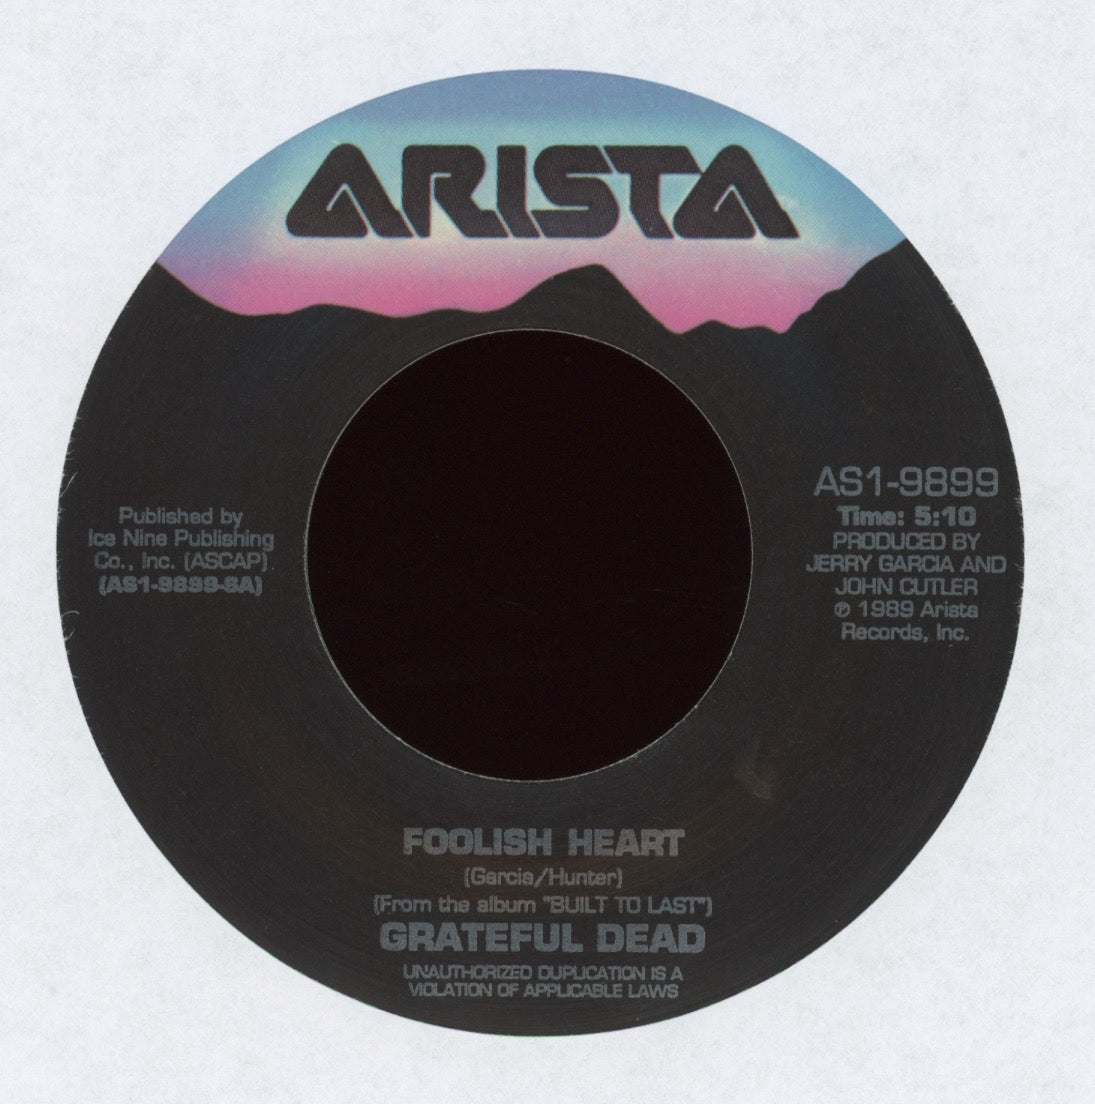 The Grateful Dead - Foolish Heart on Arista With Picture Sleeve